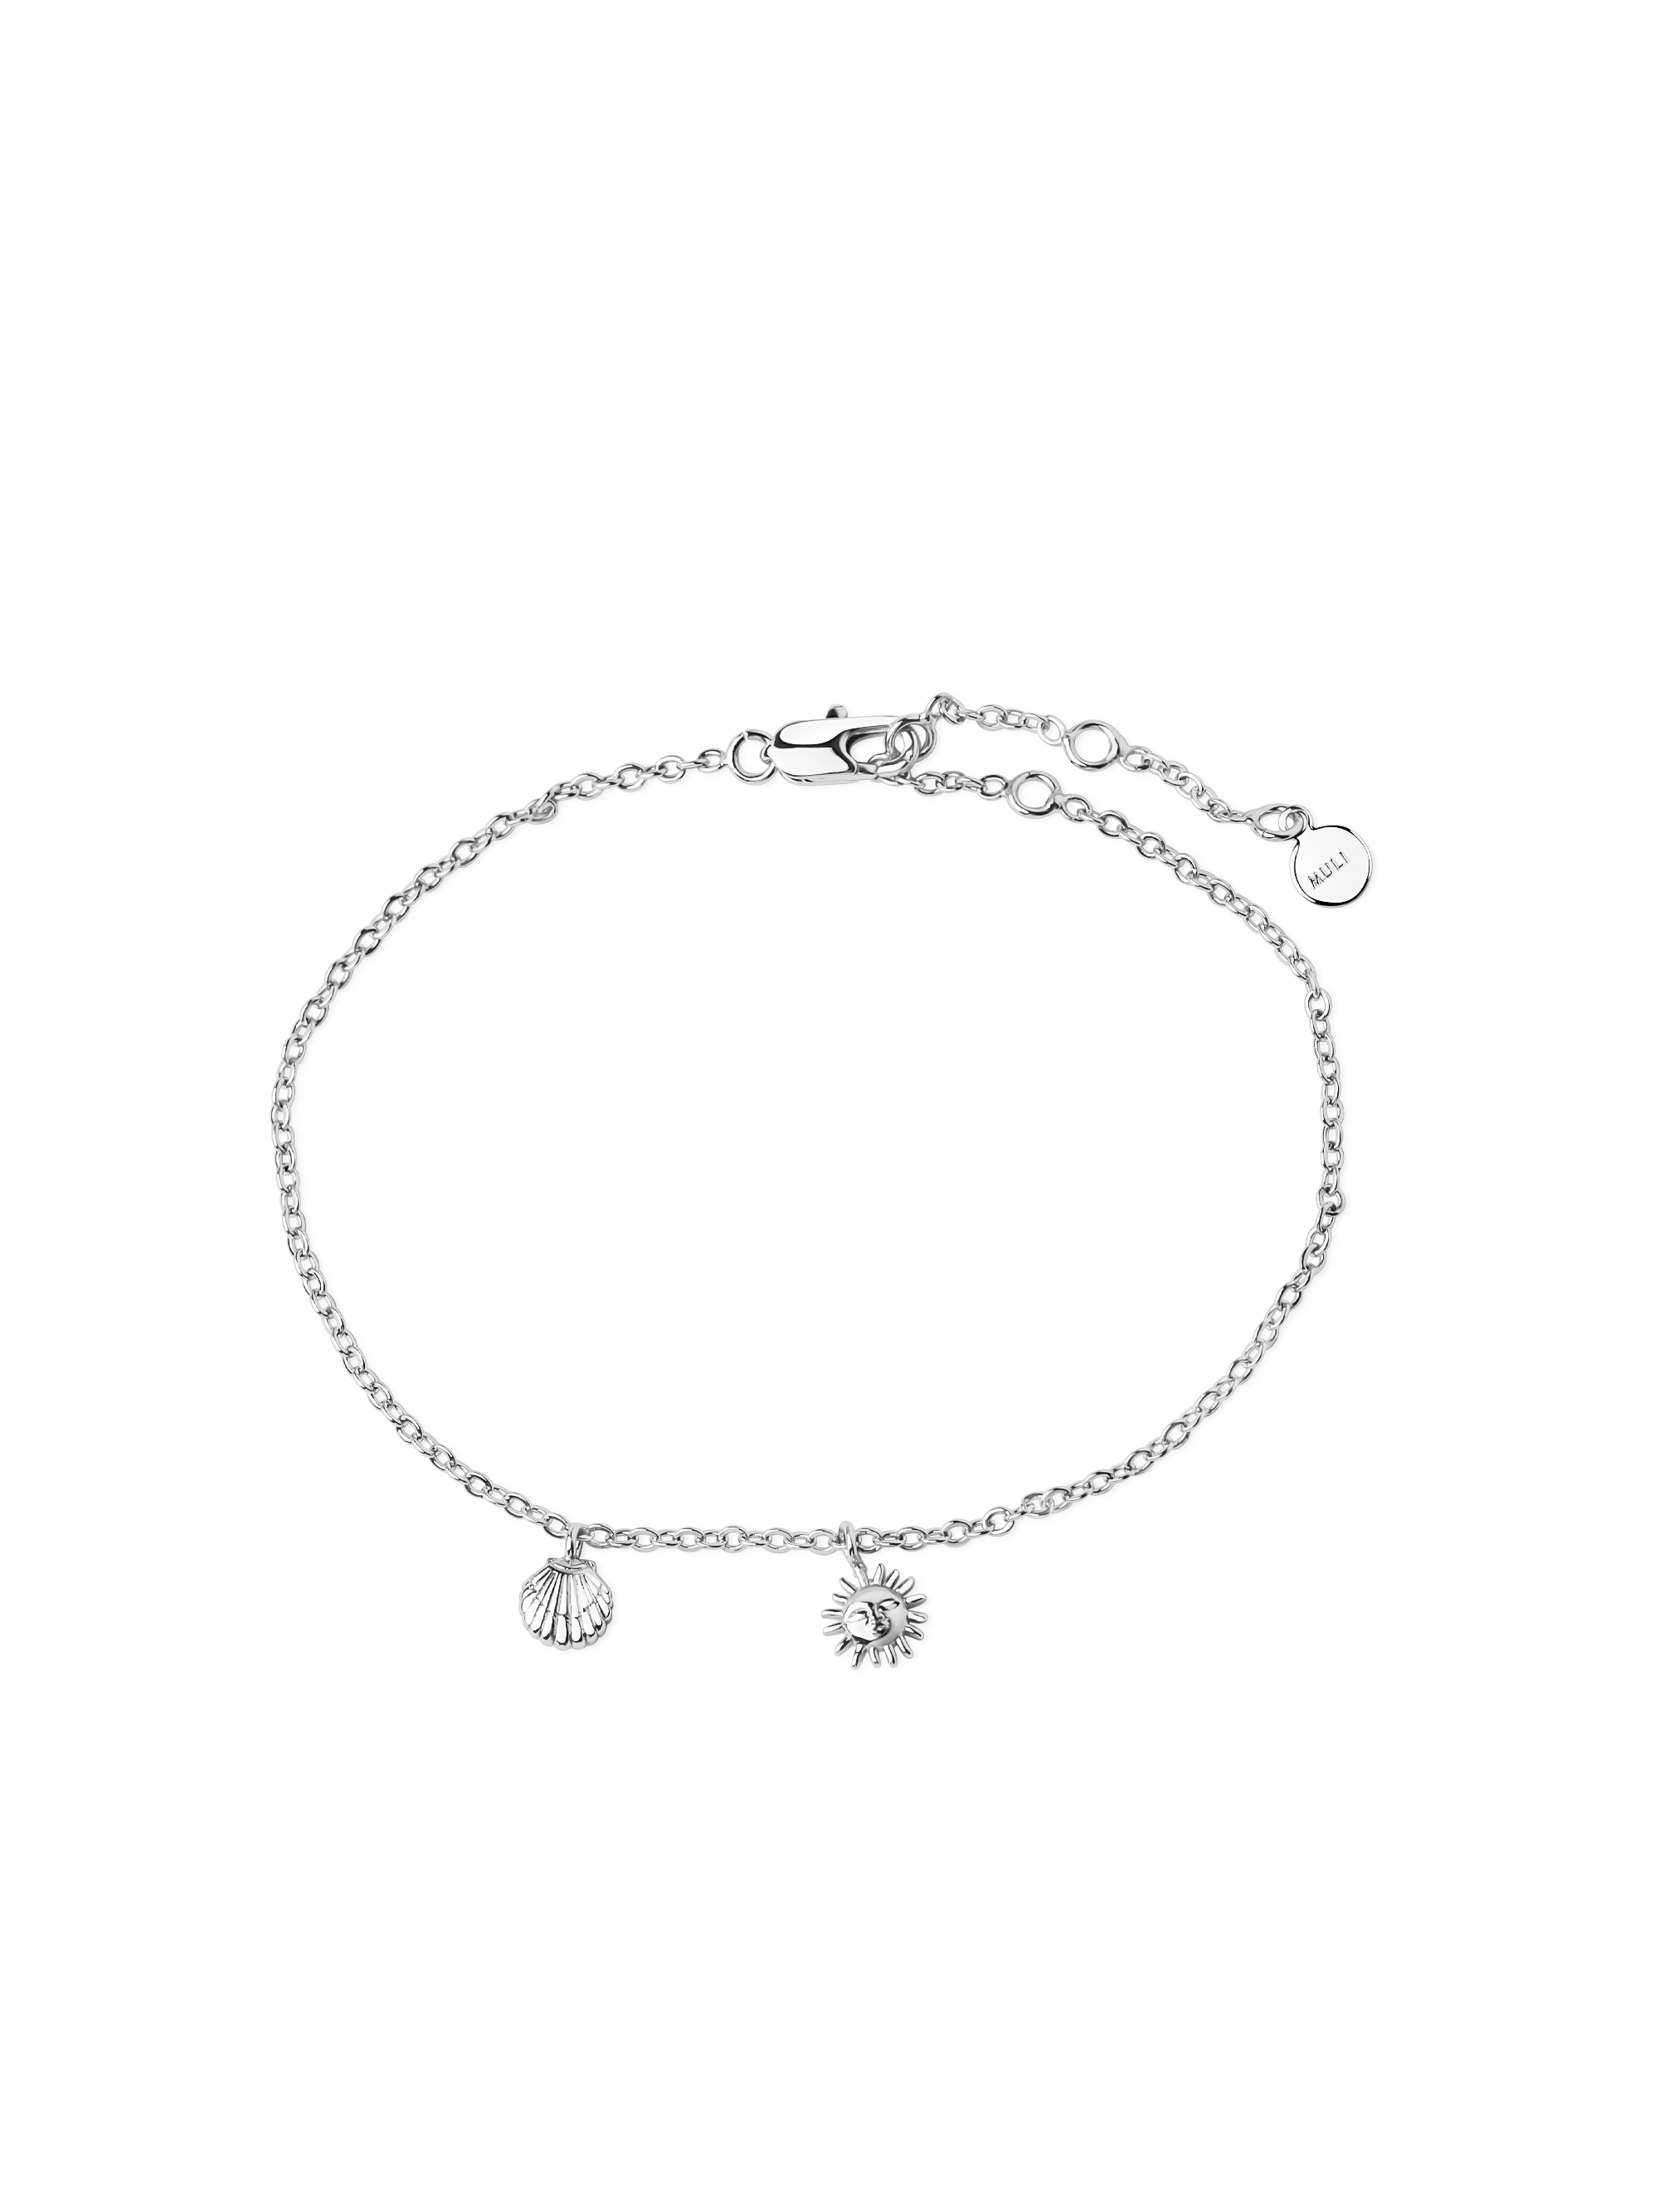 pendant anklet 925 silver plated brass